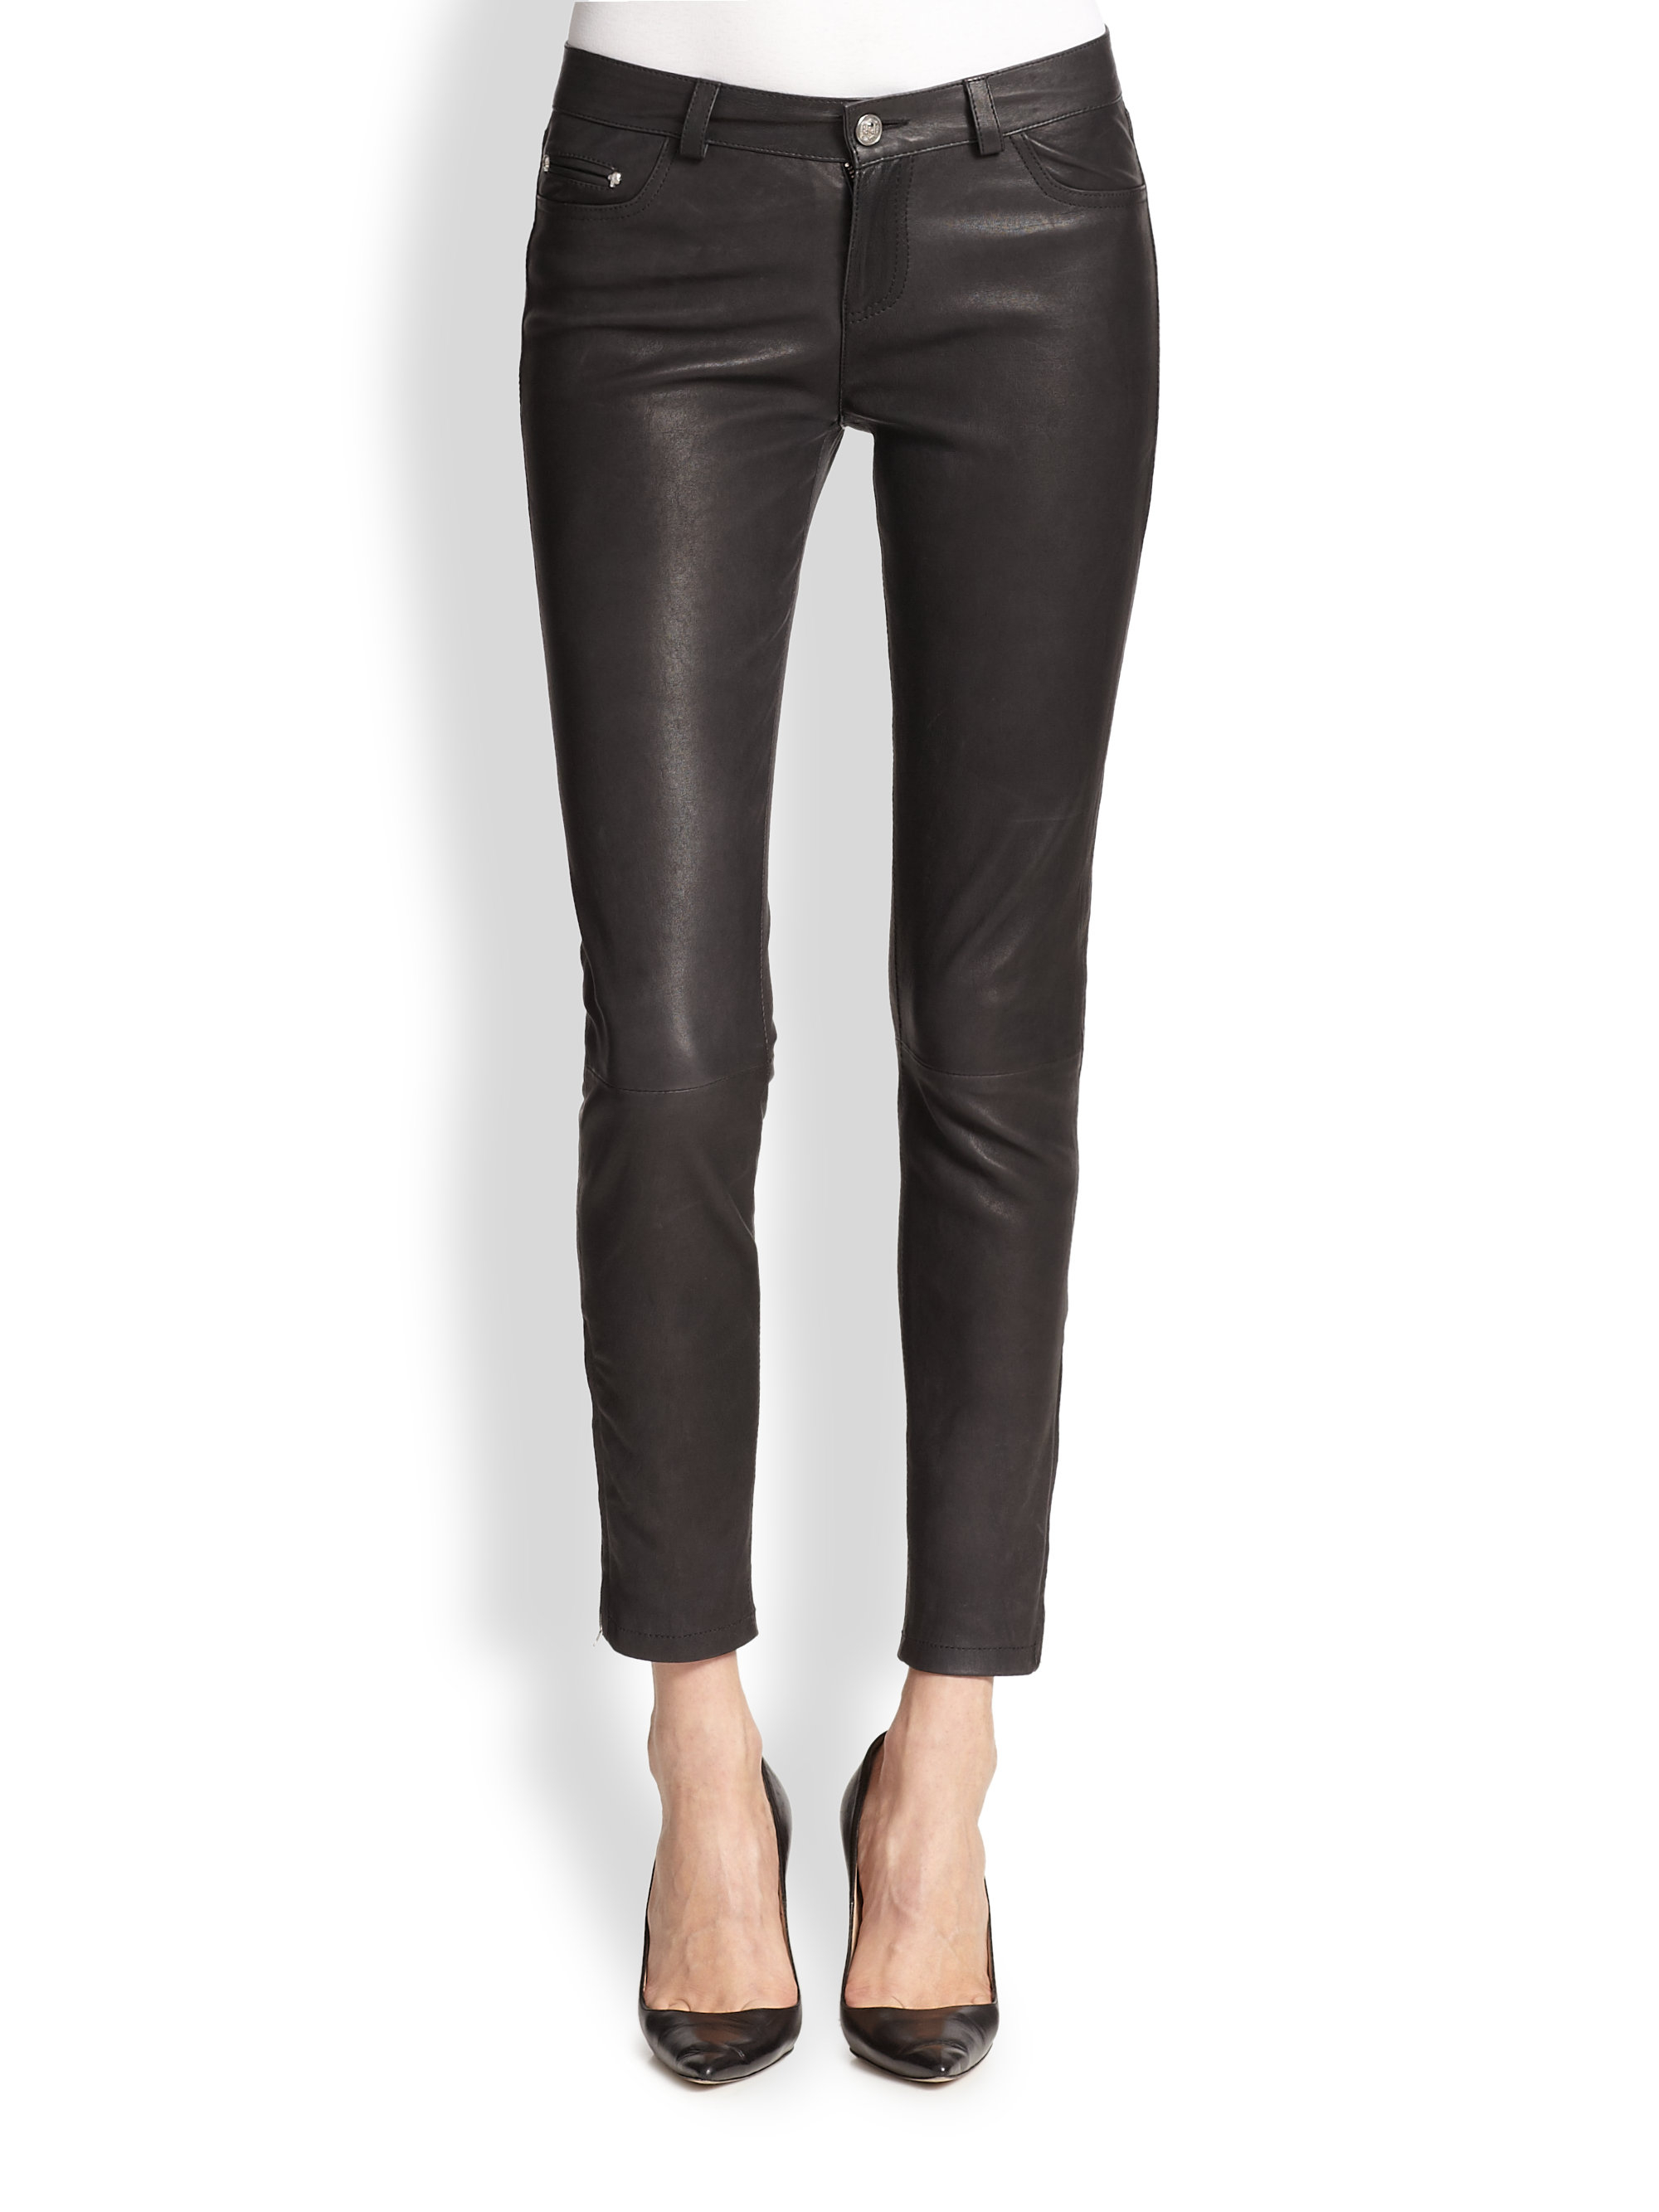 Lyst - The Kooples Leather Skinny Ankle Jeans in Black